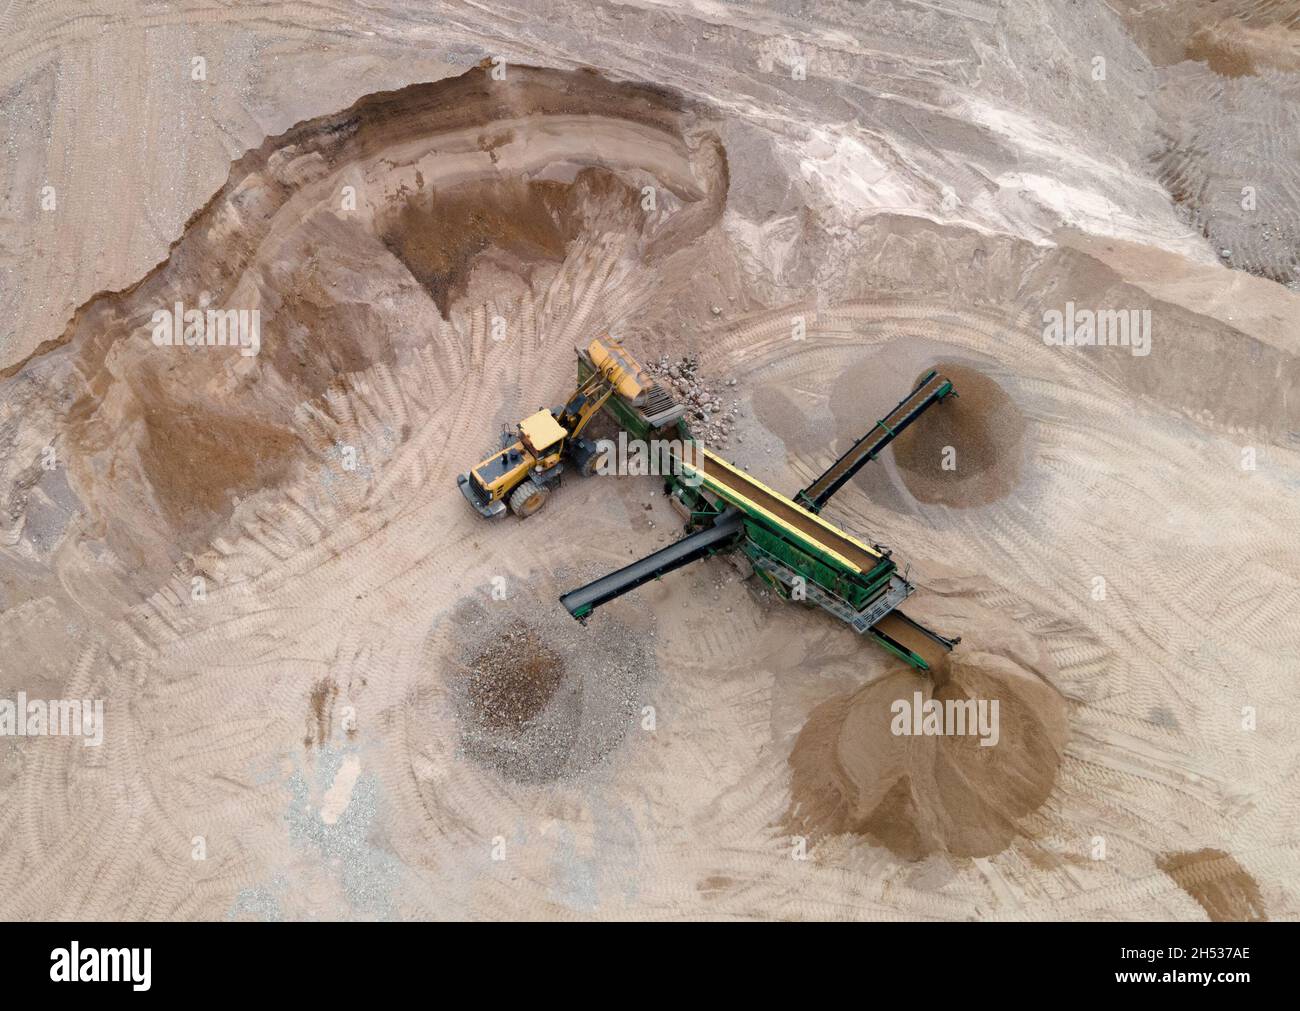 https://c8.alamy.com/comp/2H537AE/arial-view-of-the-open-pit-mine-front-end-loader-loading-gravel-into-stone-jaw-crusher-in-open-pit-limestone-quarry-development-heavy-mining-machin-2H537AE.jpg